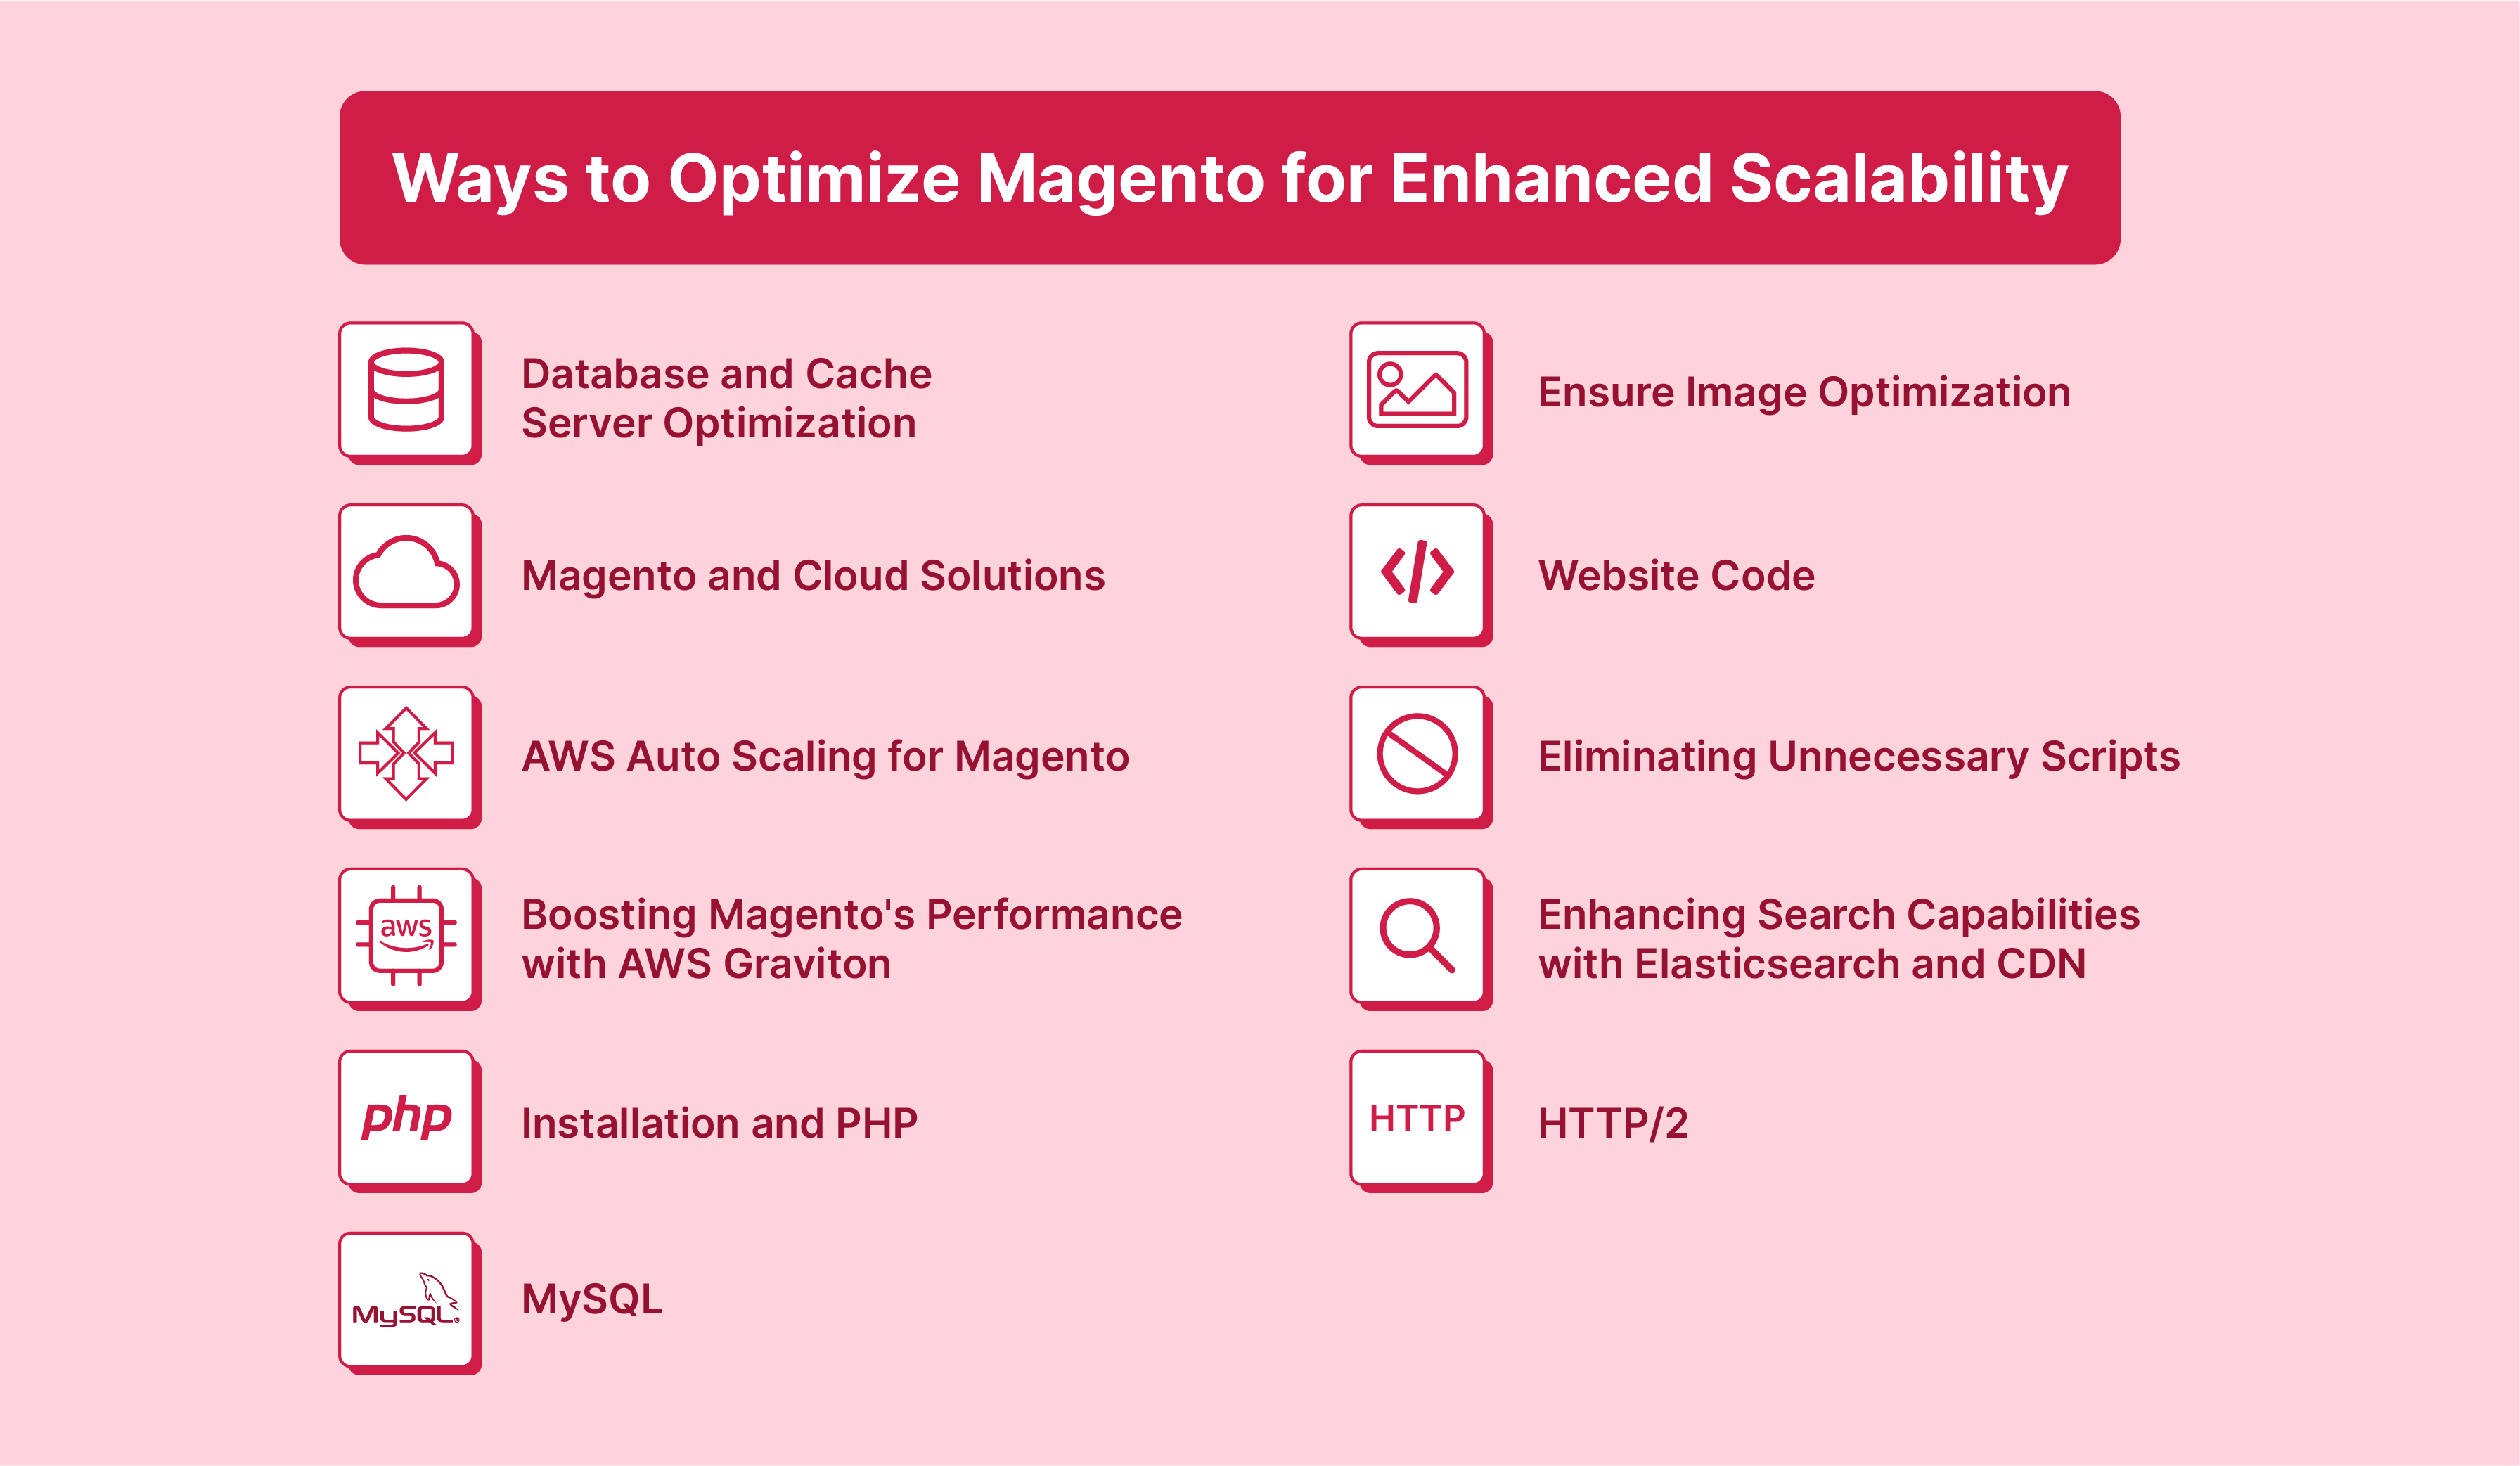 Key Strategies to Optimize Magento for Scalability